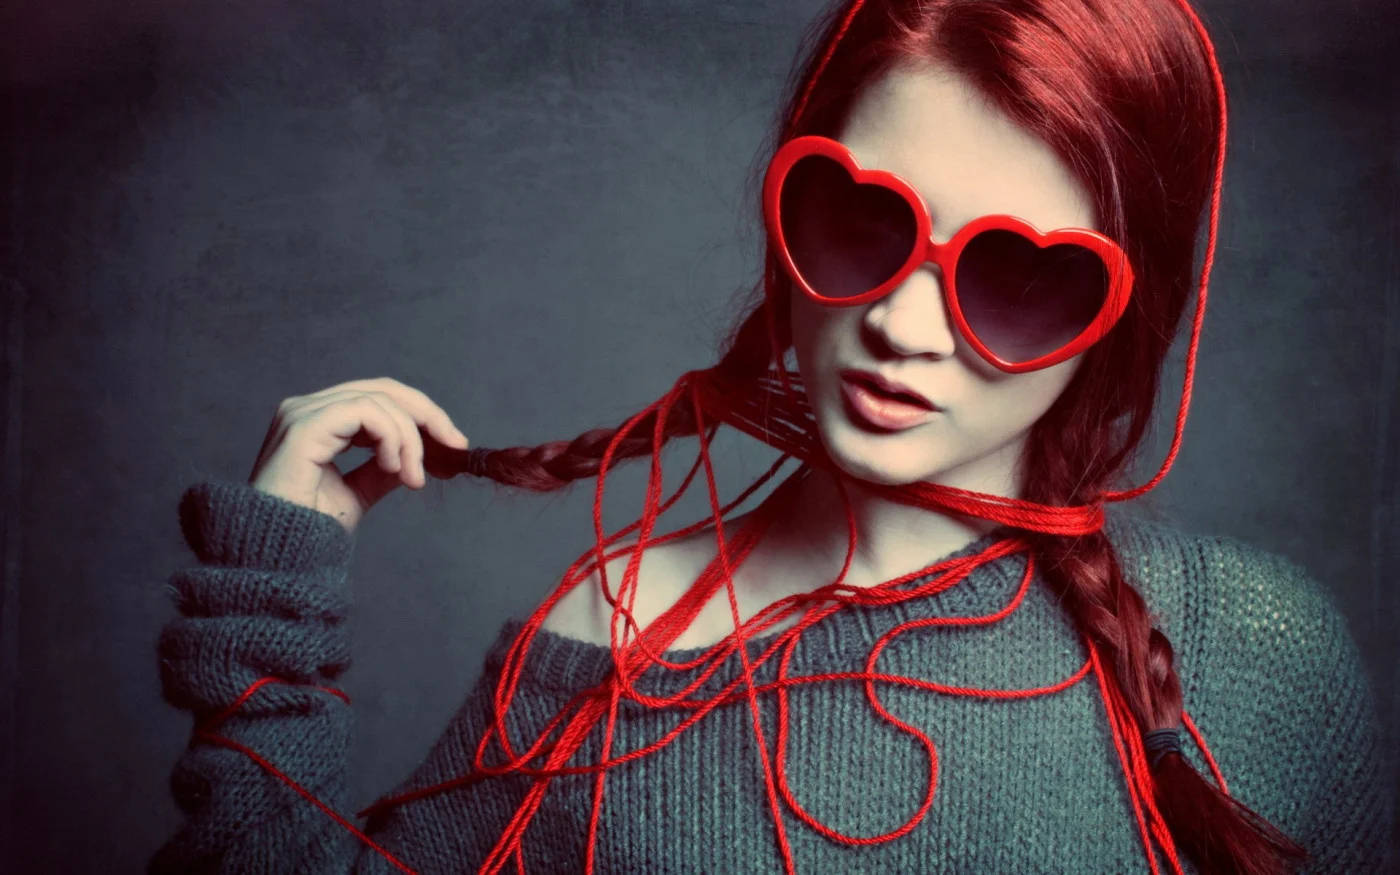 Cool Attitude Girl With Braided Red Hair Wallpaper